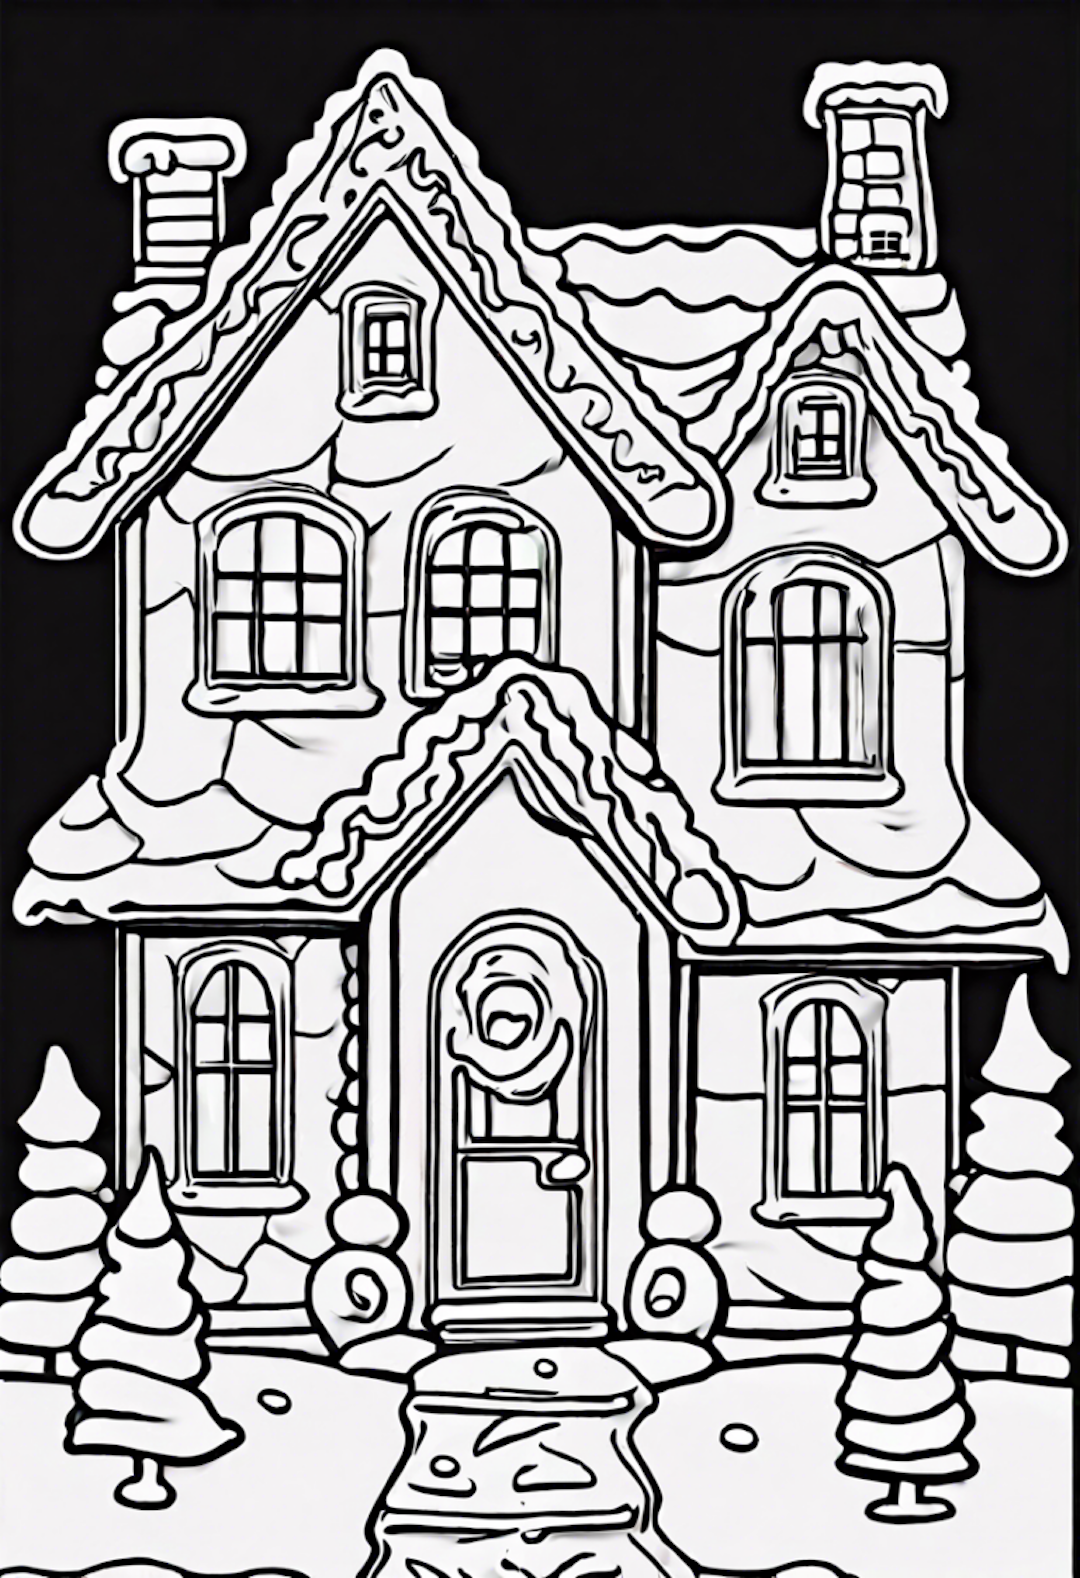 Snowy Winter Cottage Coloring Page coloring pages